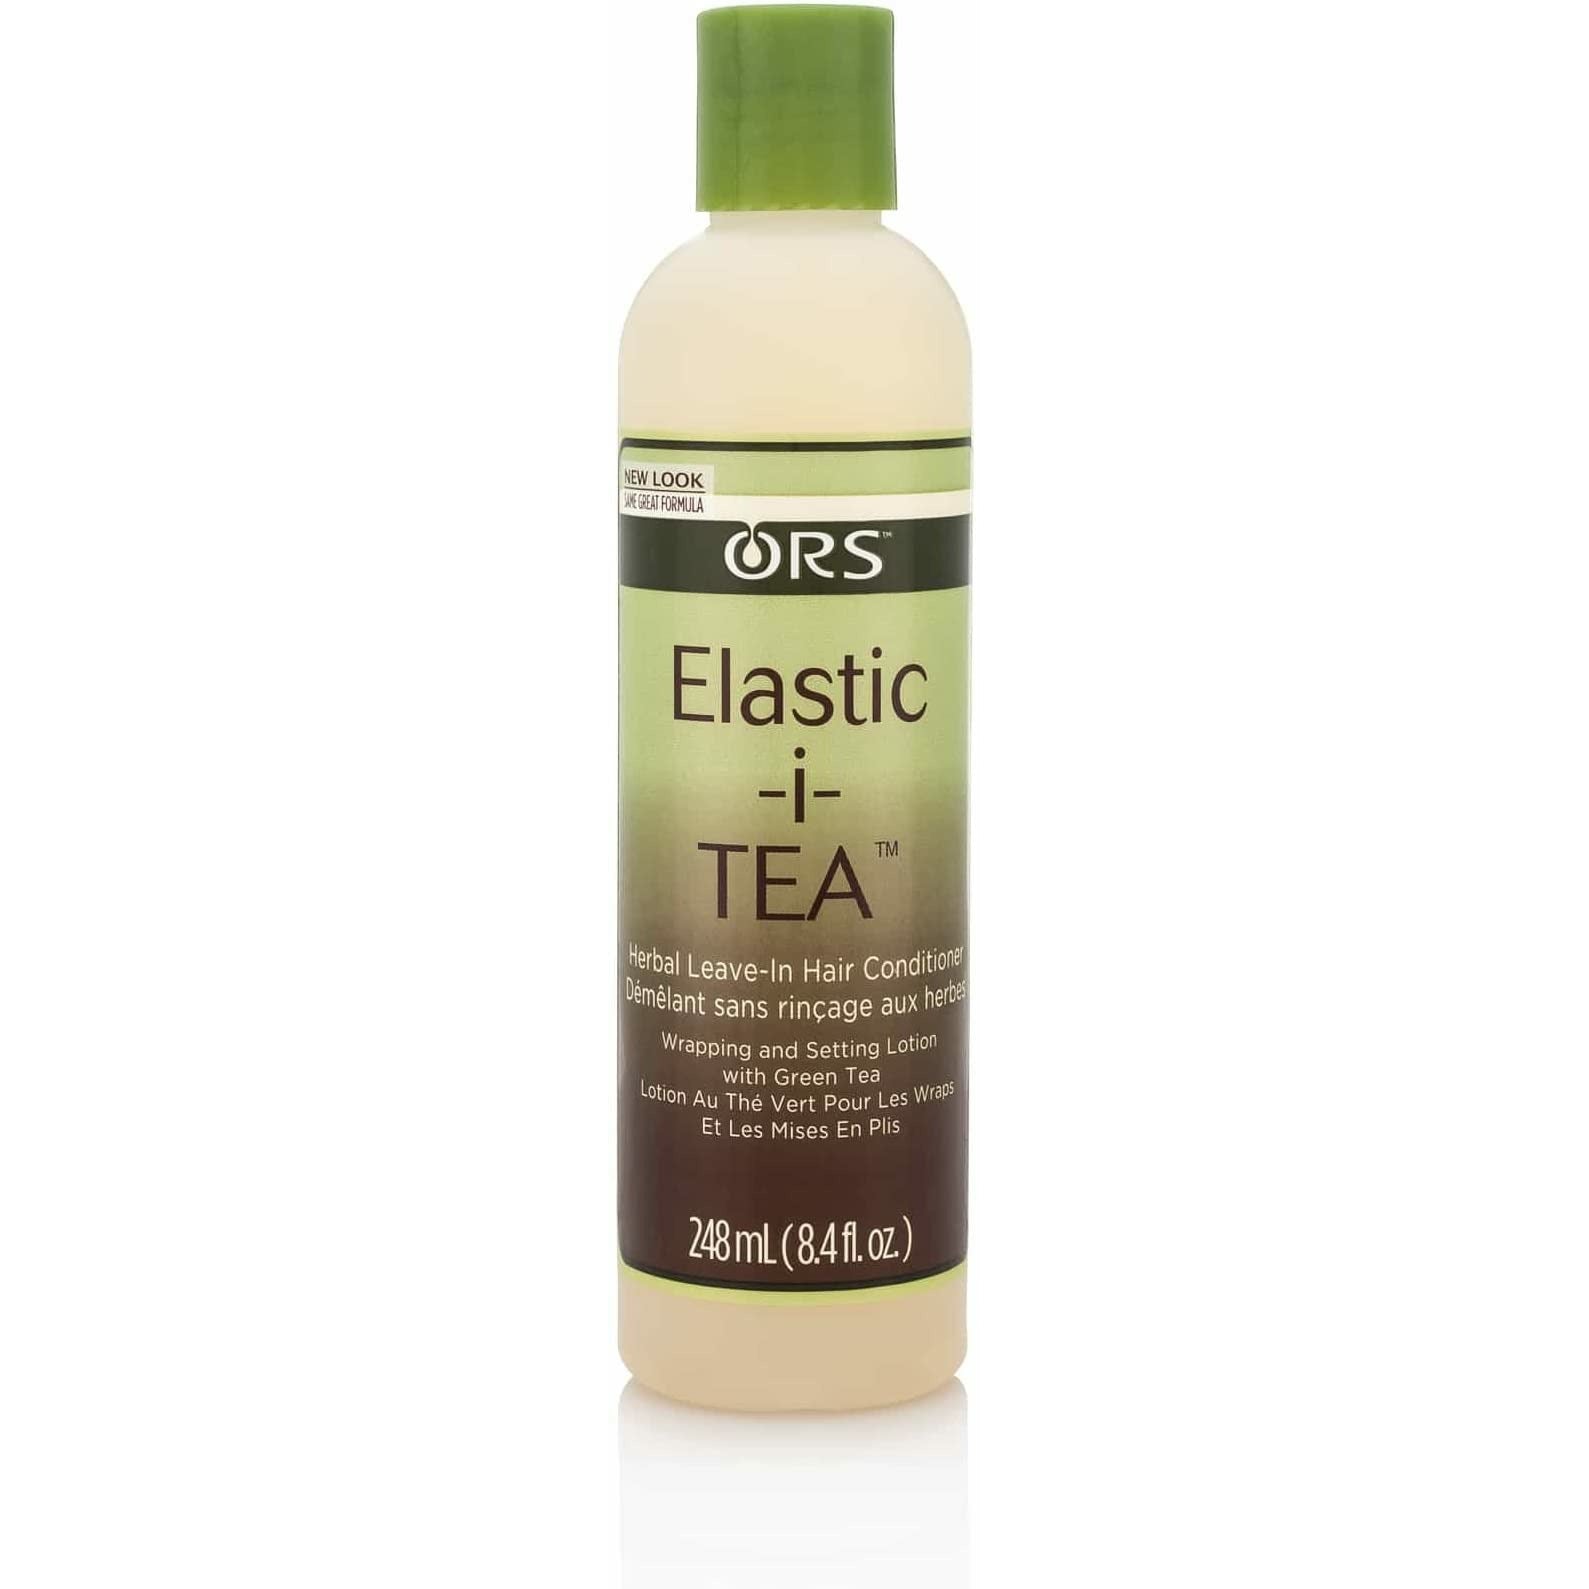 ORS ELASTIC -i- TEA LEAVE-IN CONDITIONER 9oz-ORS- Hive Beauty Supply